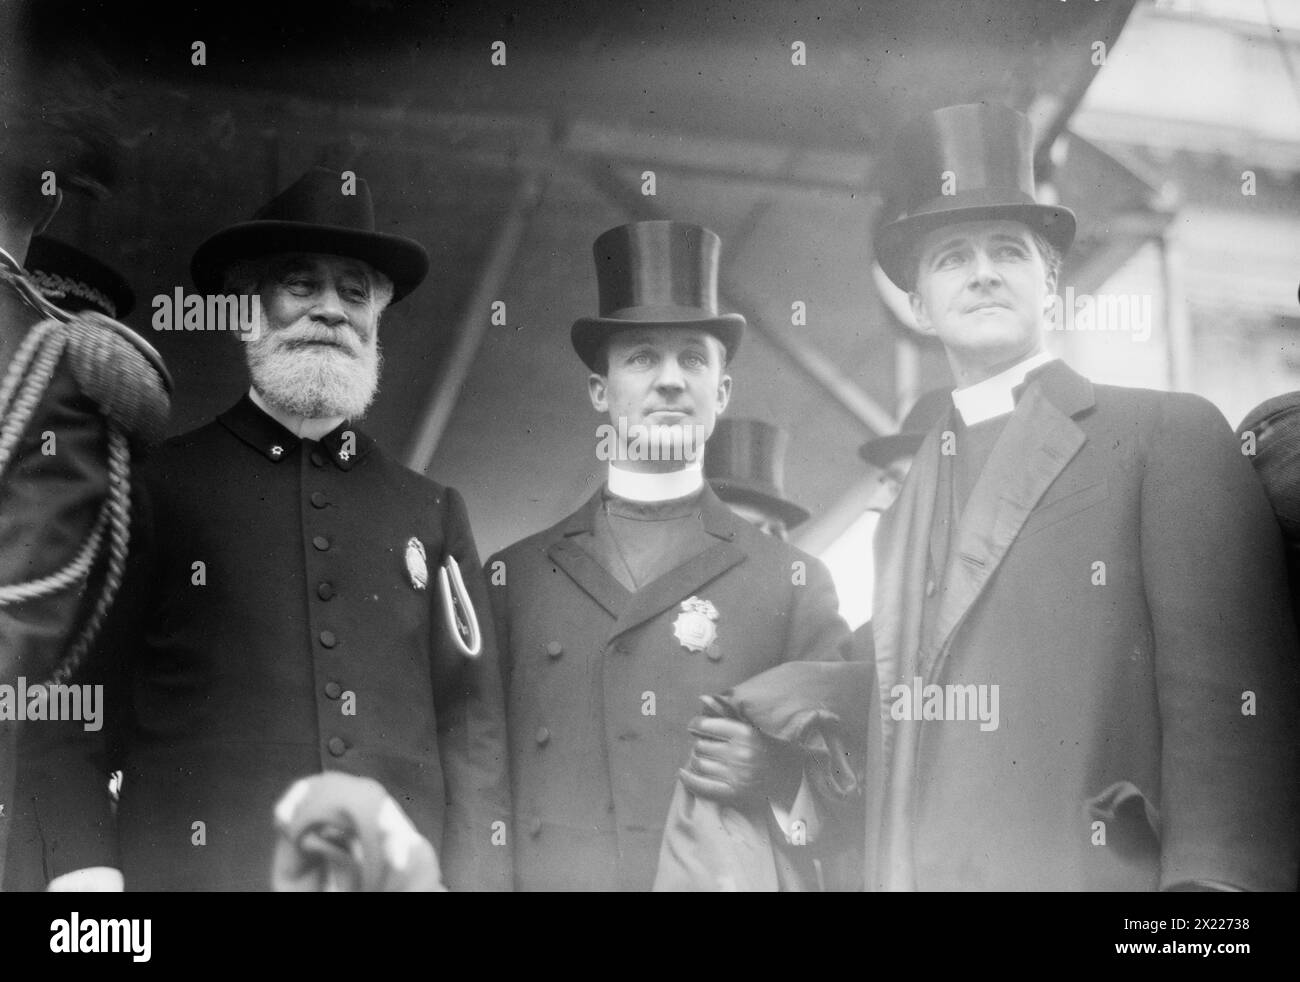 Police Chaplains - Blum - Stires - Genns. N.Y., between c1910 and c1915. Shows police chaplains including Rabbi Abraham Blum, New York City's first Jewish police chaplain and Ernest M. Stires. Stock Photo